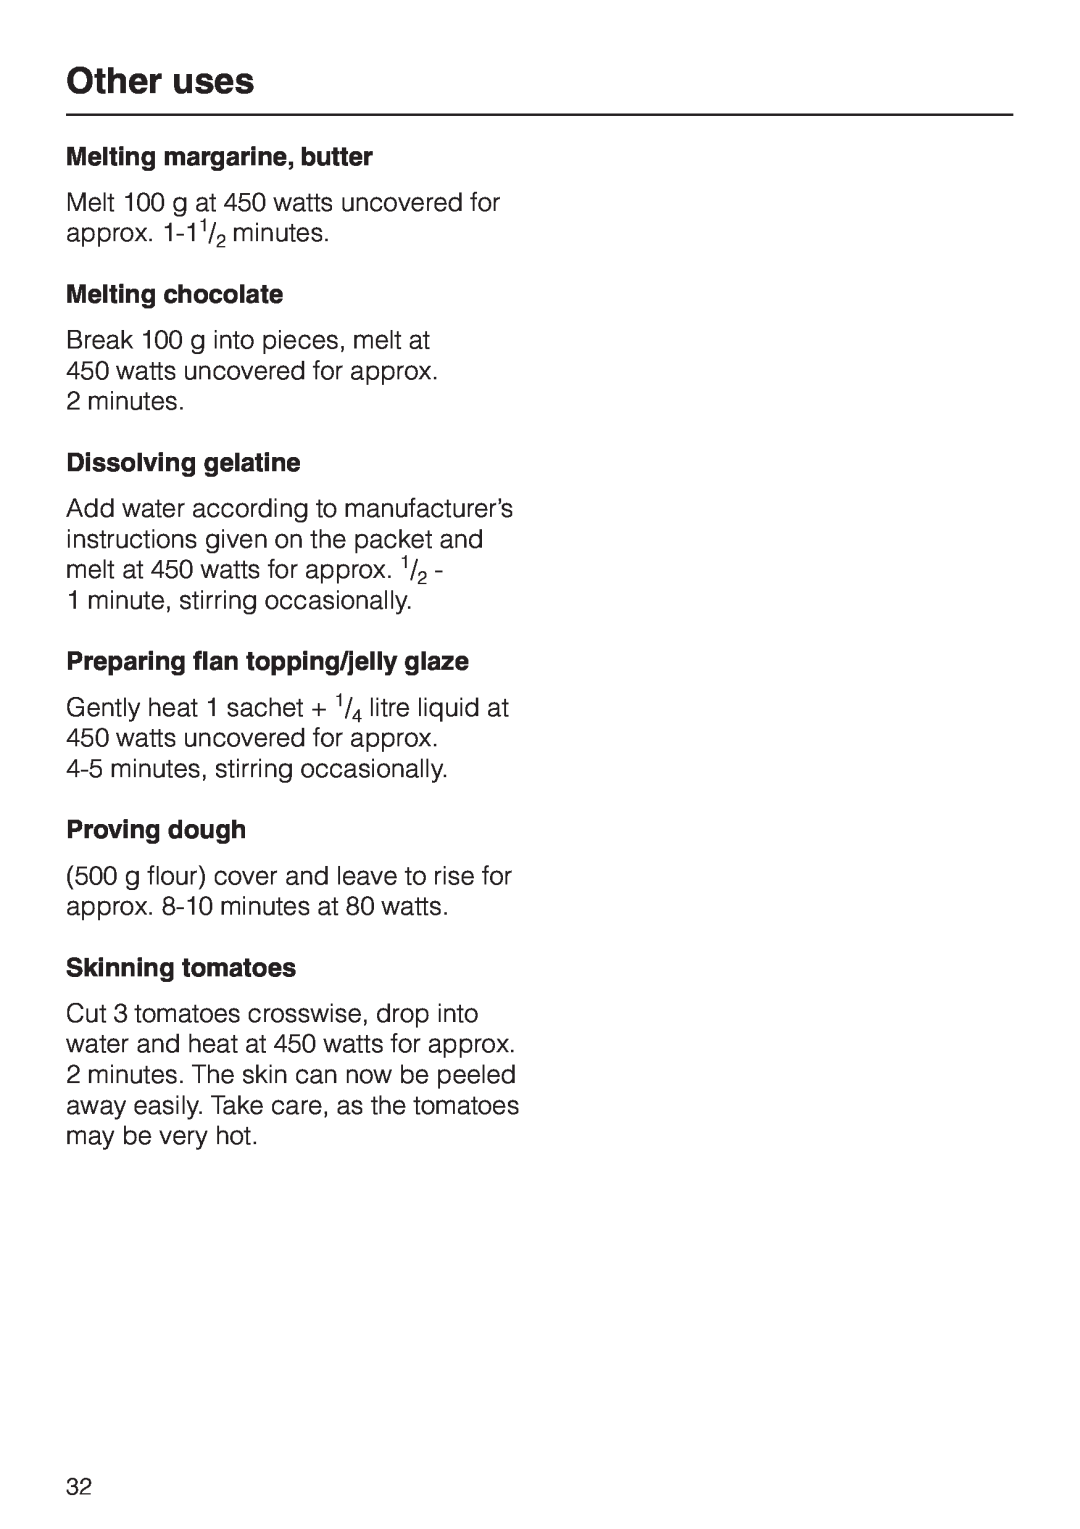 Miele M 613 G manual Other uses, Melting margarine, butter, Melting chocolate, Dissolving gelatine, Proving dough 